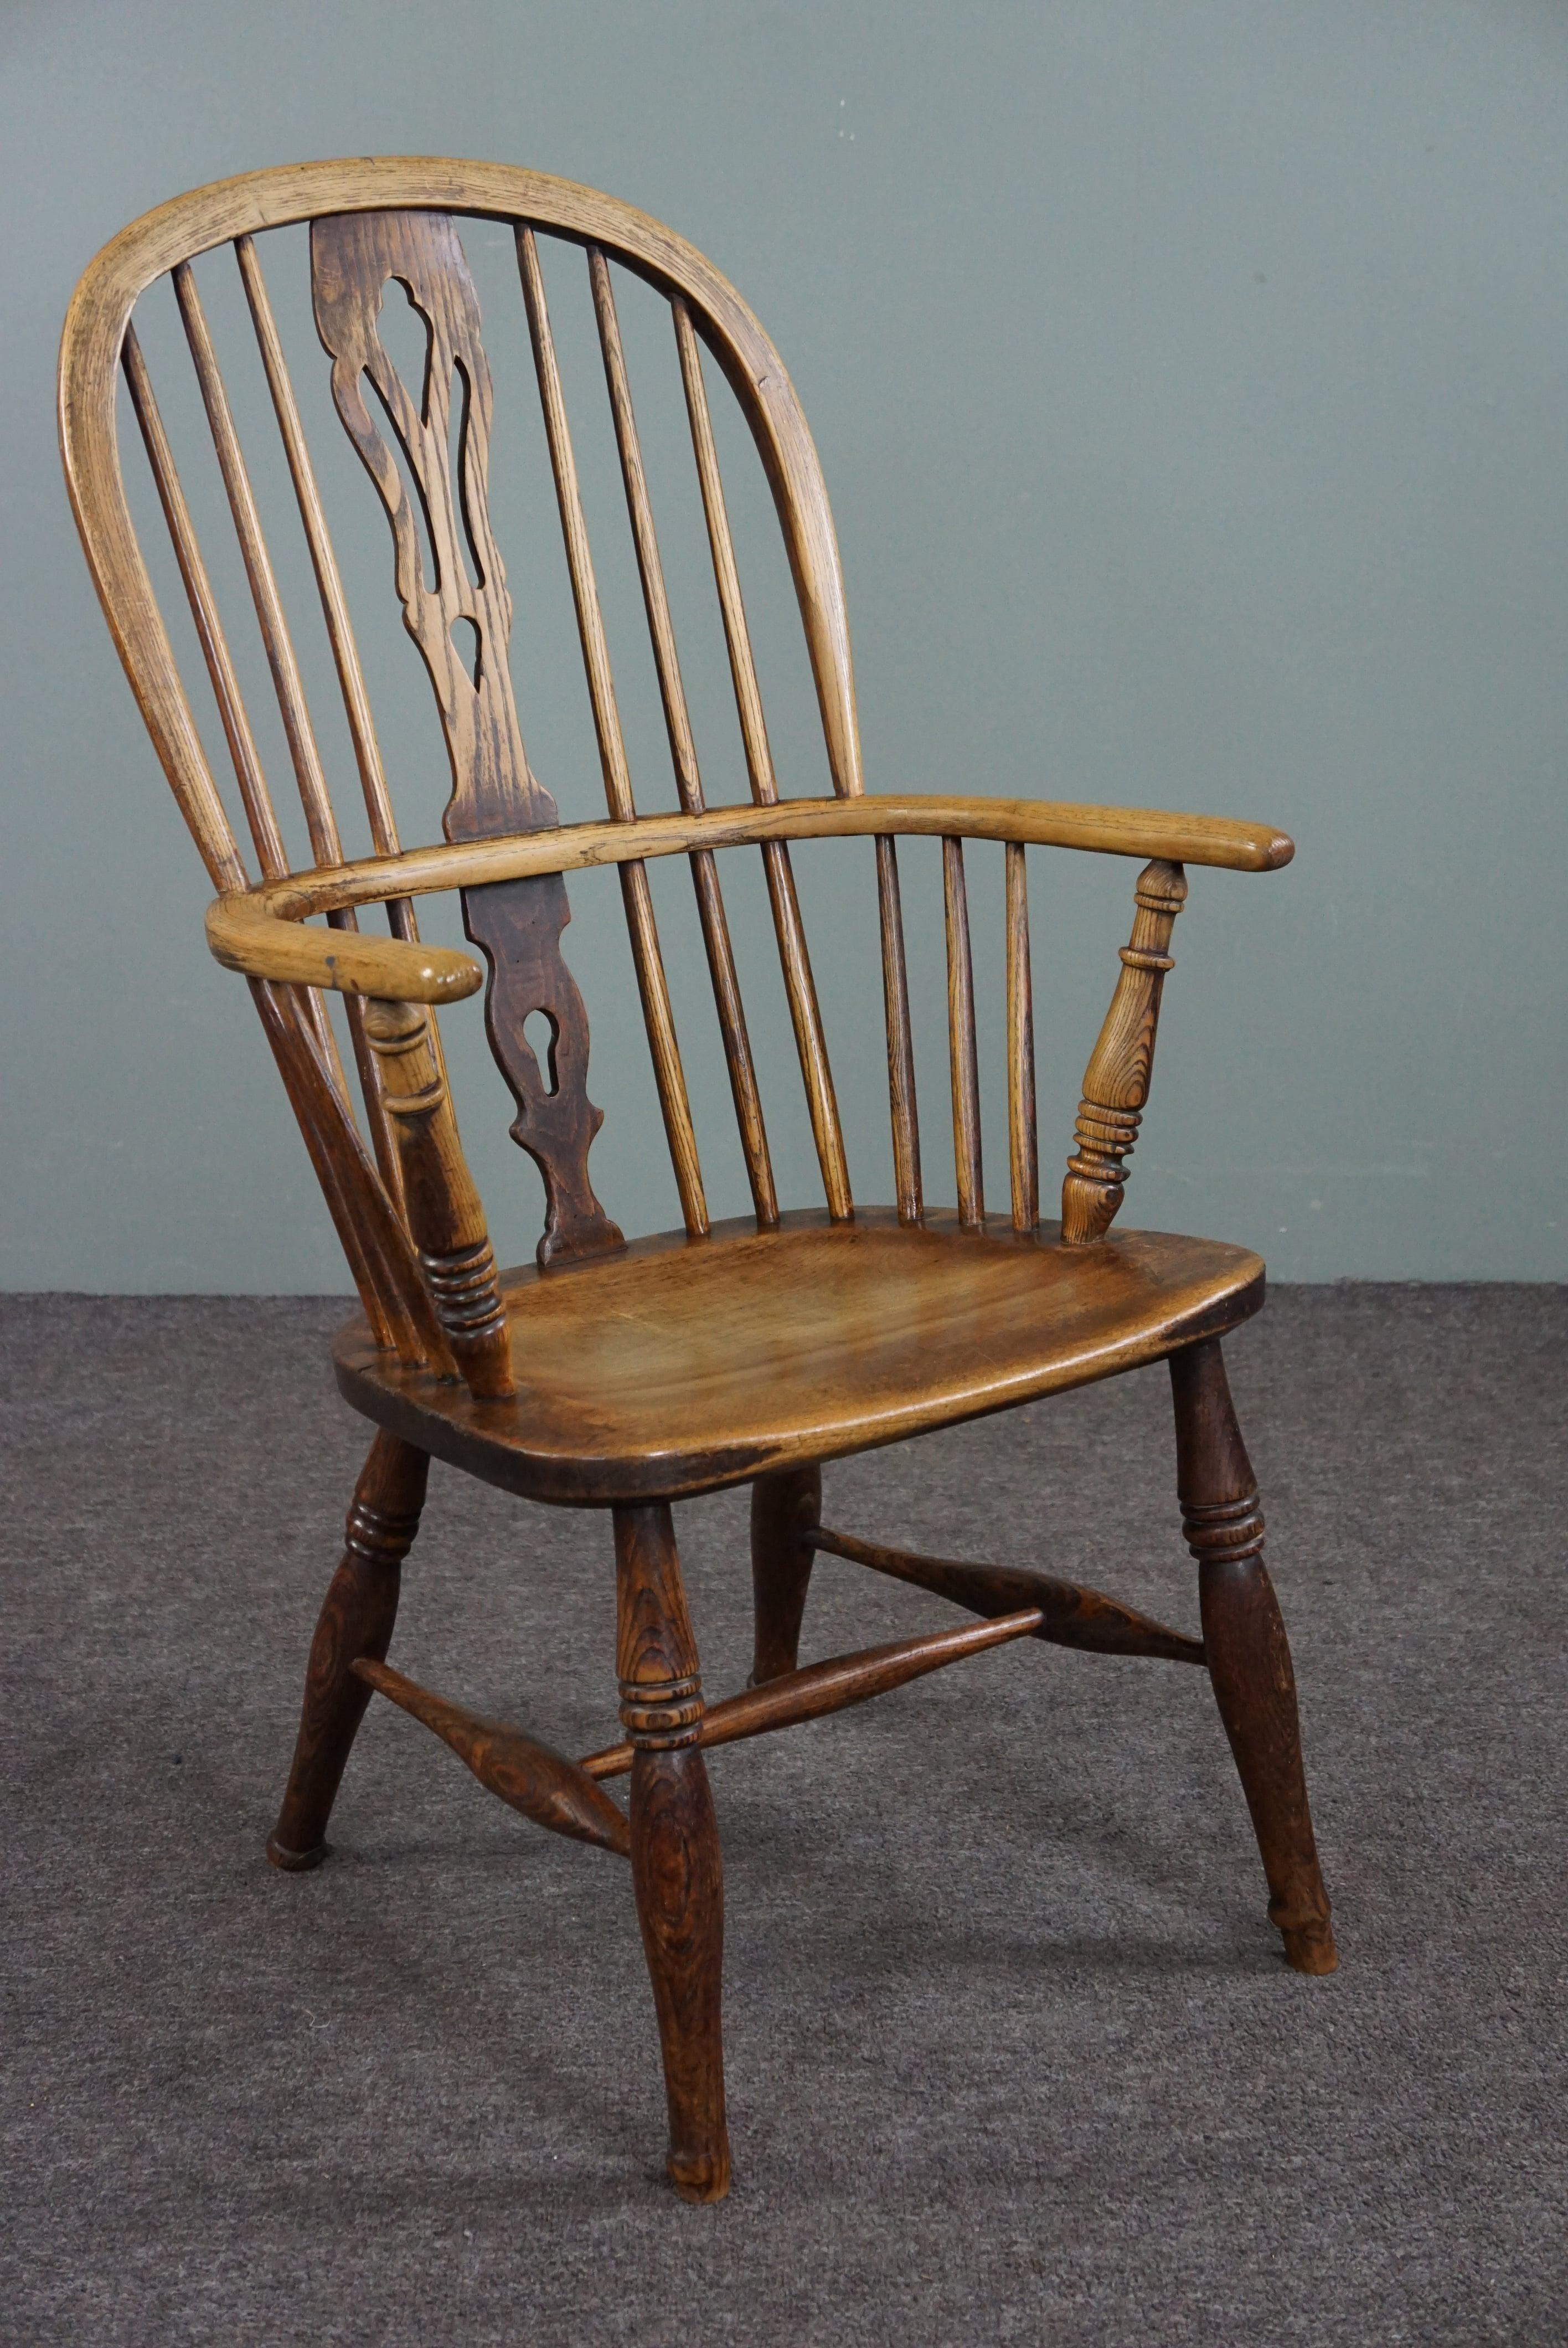 Hand-Crafted Very charming antique 18th century English Windsor chair/armchair For Sale